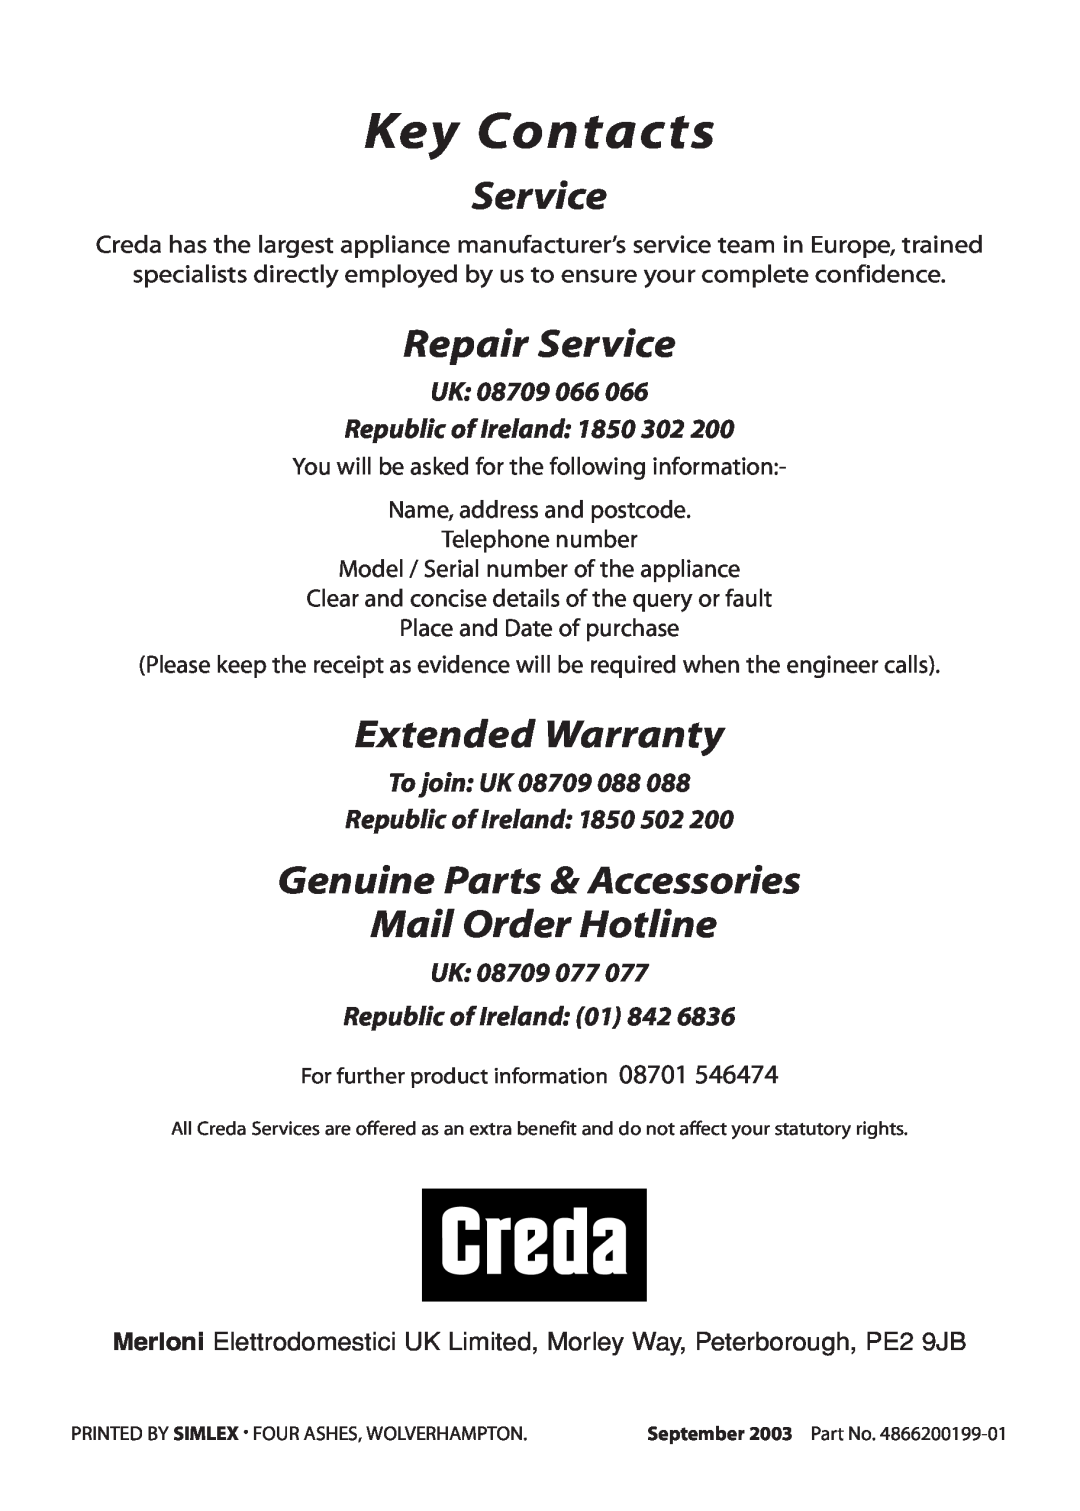 Creda S230G Key Contacts, Repair Service, Extended Warranty, Genuine Parts & Accessories Mail Order Hotline 